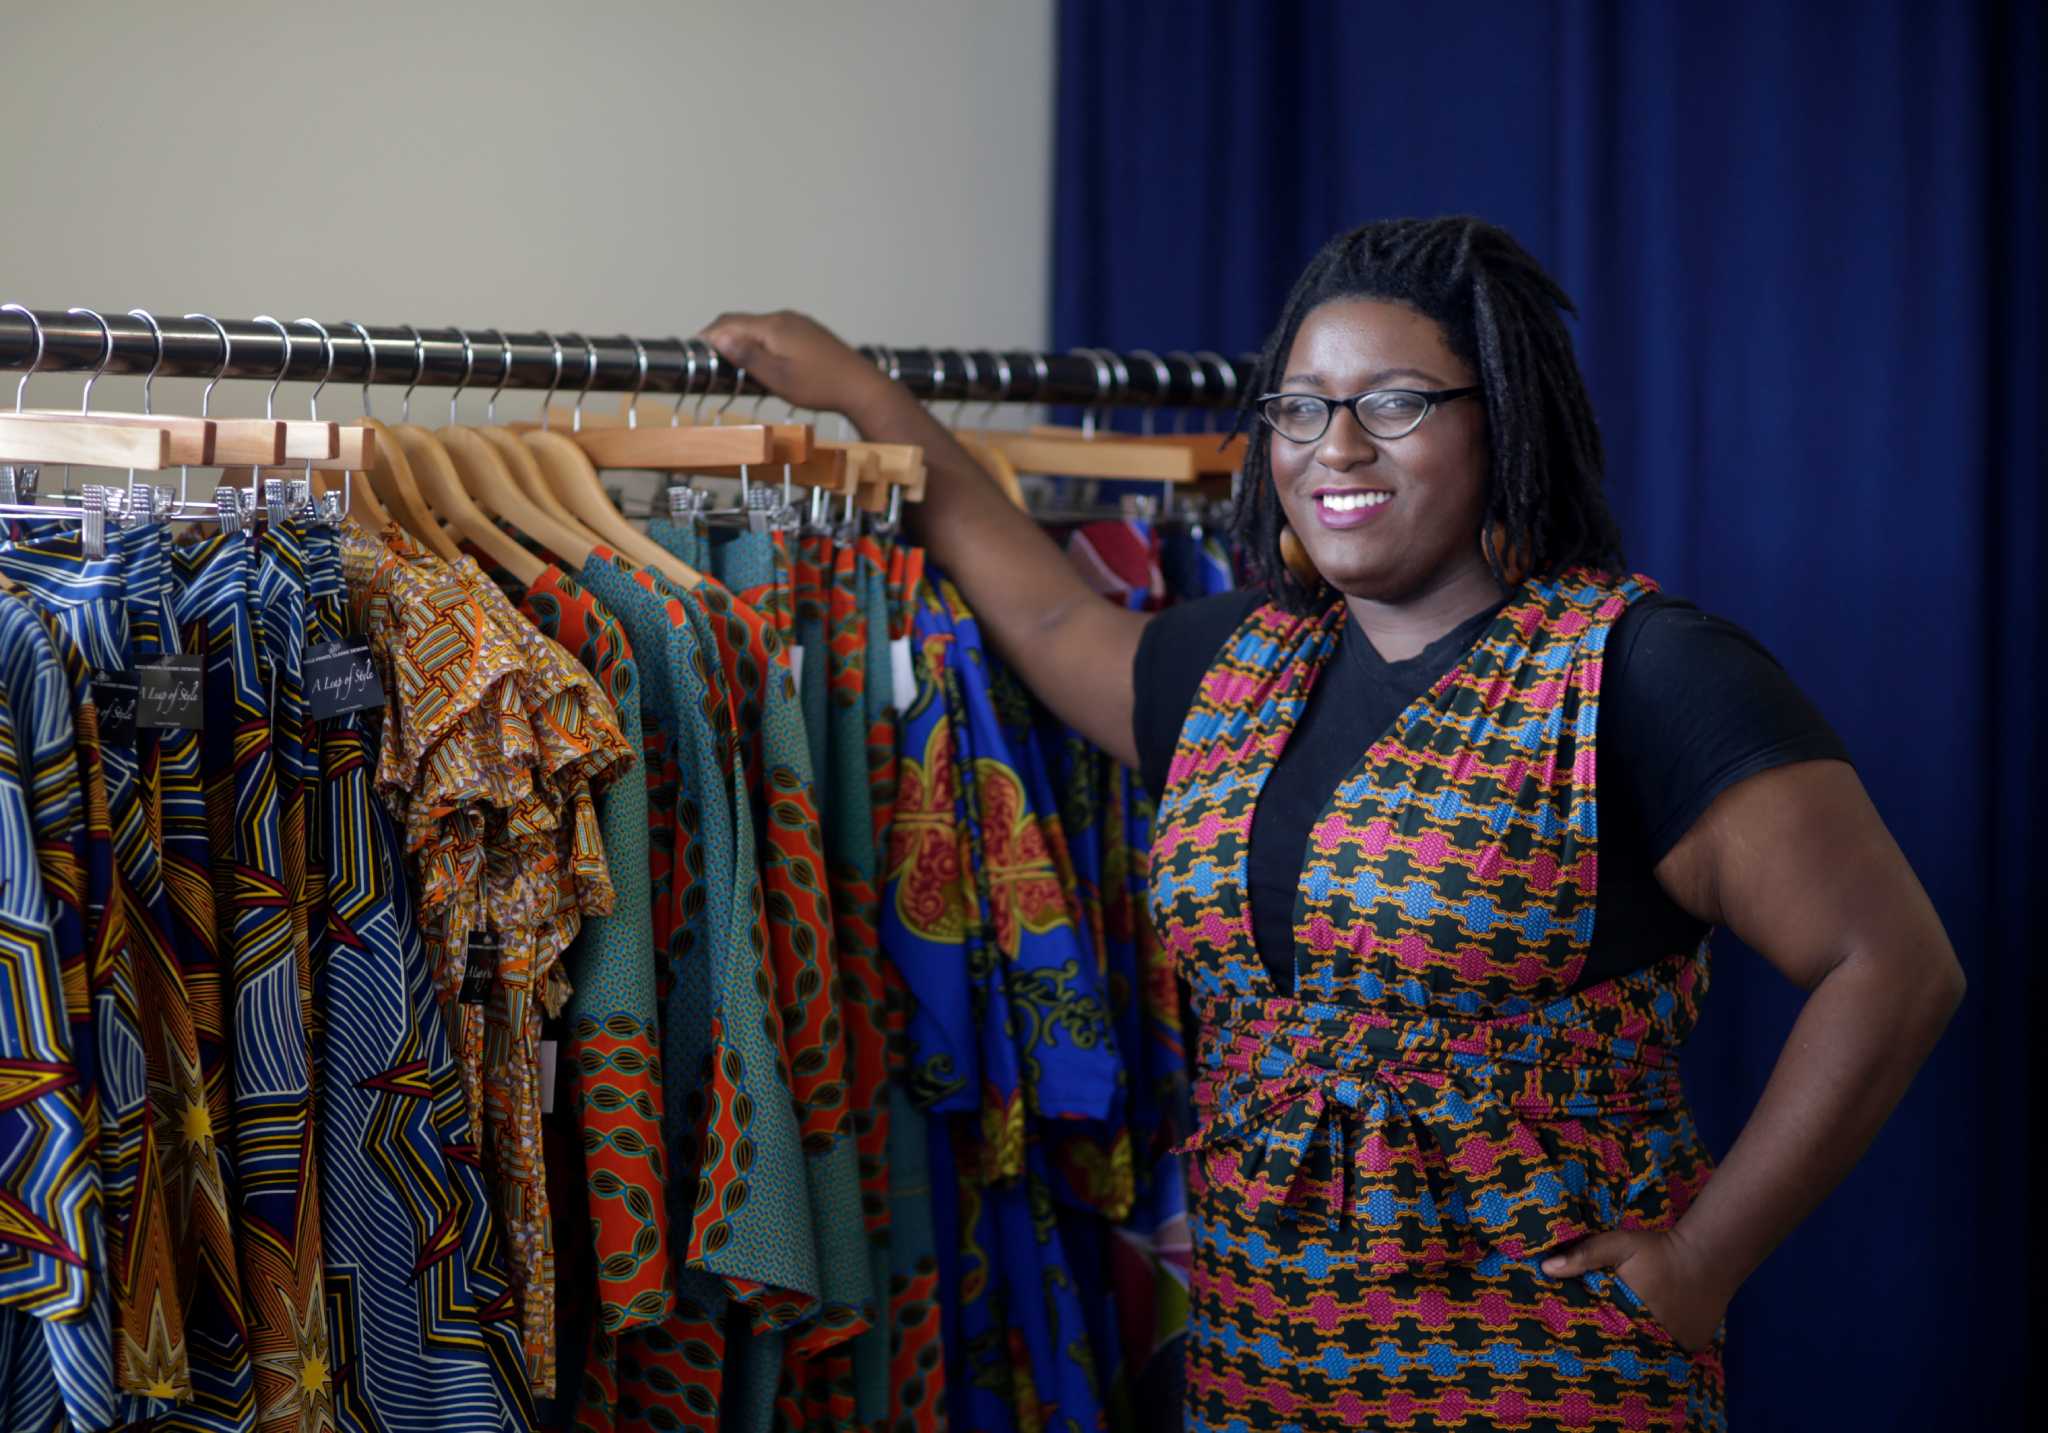 Find your perfect outfit at these Black-owned Houston boutiques